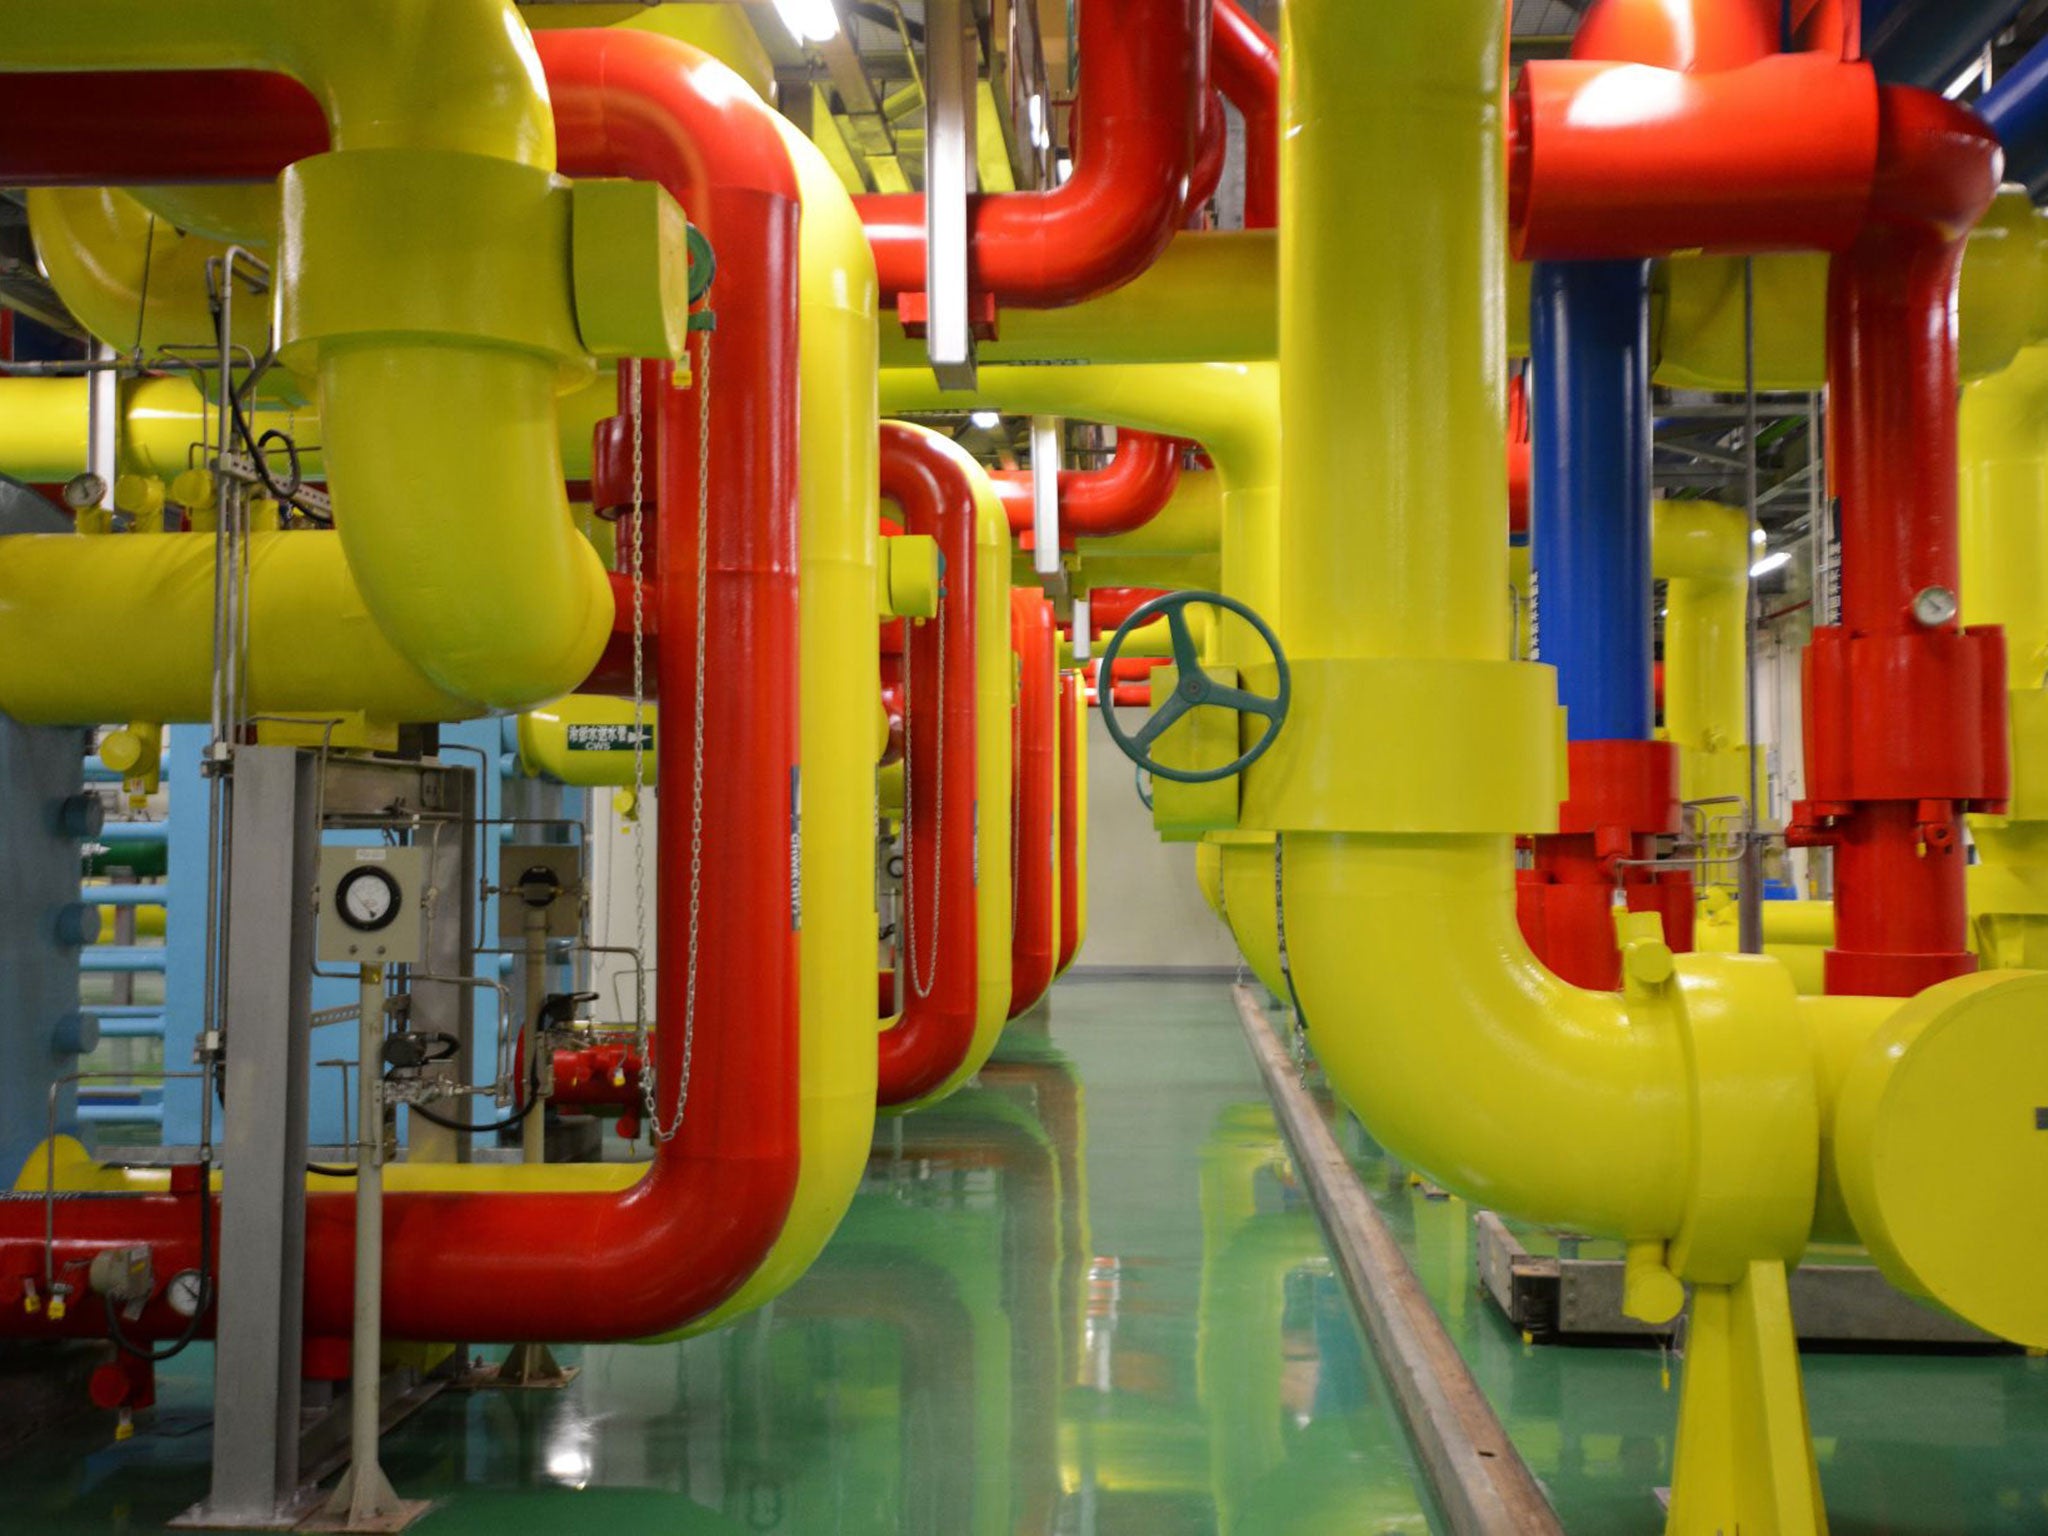 The facilities of the Google data centre in Taiwan